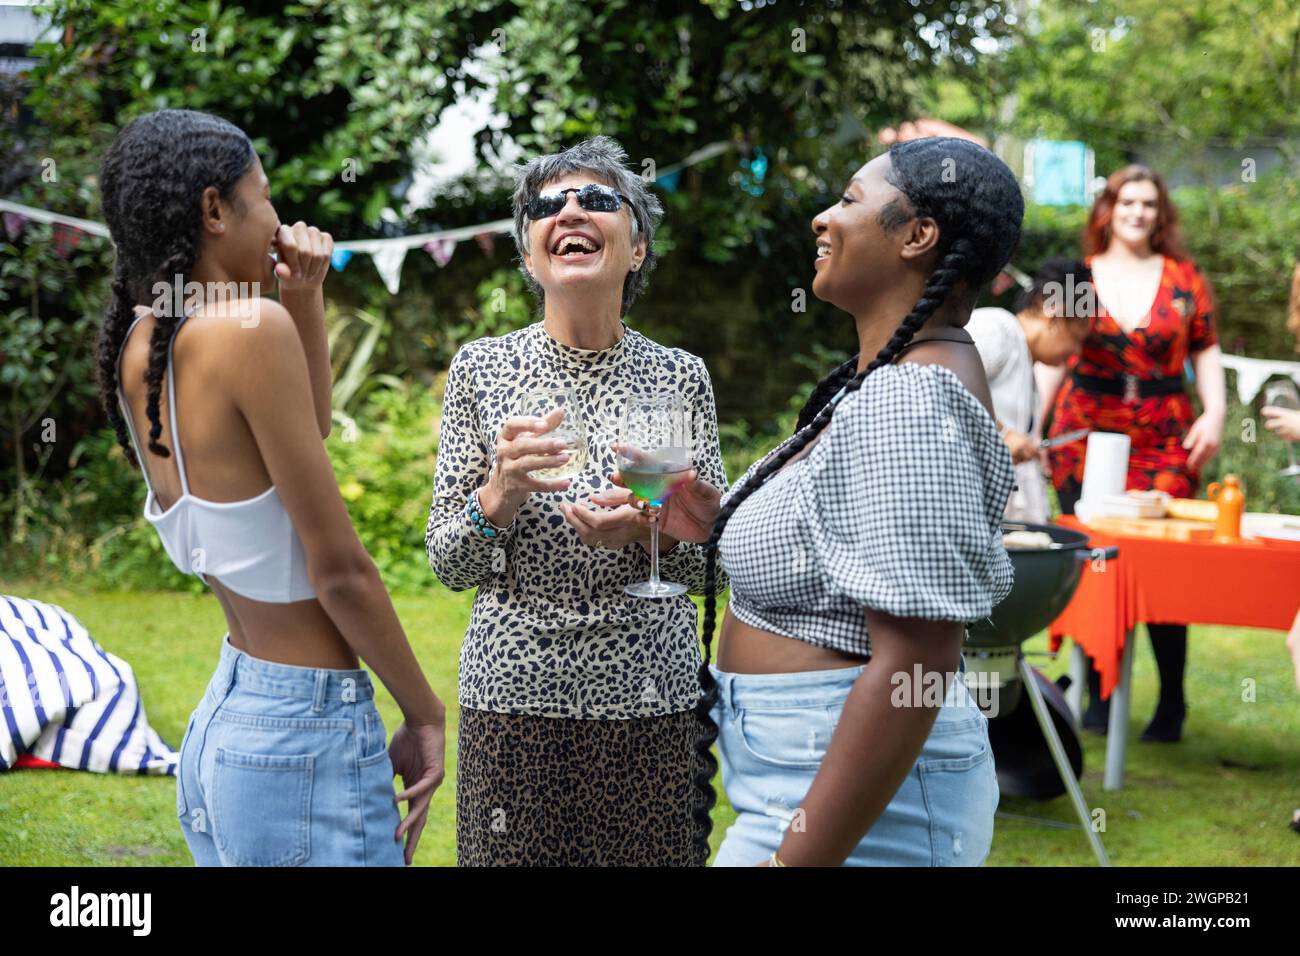 Older woman laughing and having fun with two young women  / grand daughters  /female friends at a summer garden BBQ party. Stock Photo